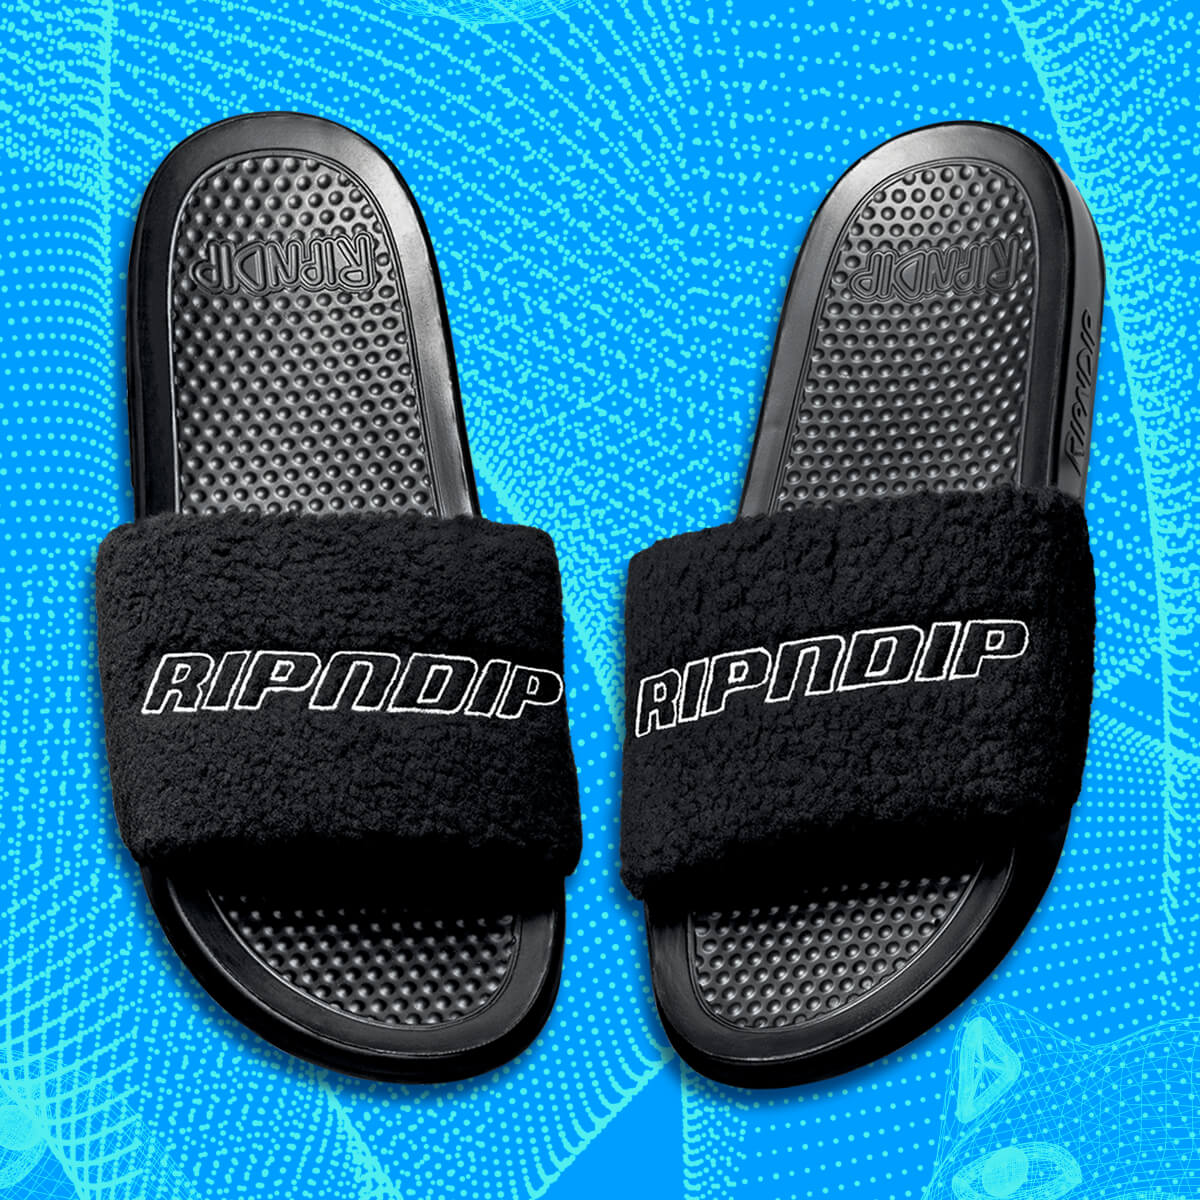 NEW ARRIVAL SLIDES FROM RIPNDIP AND MORE - SHOP SLIDES